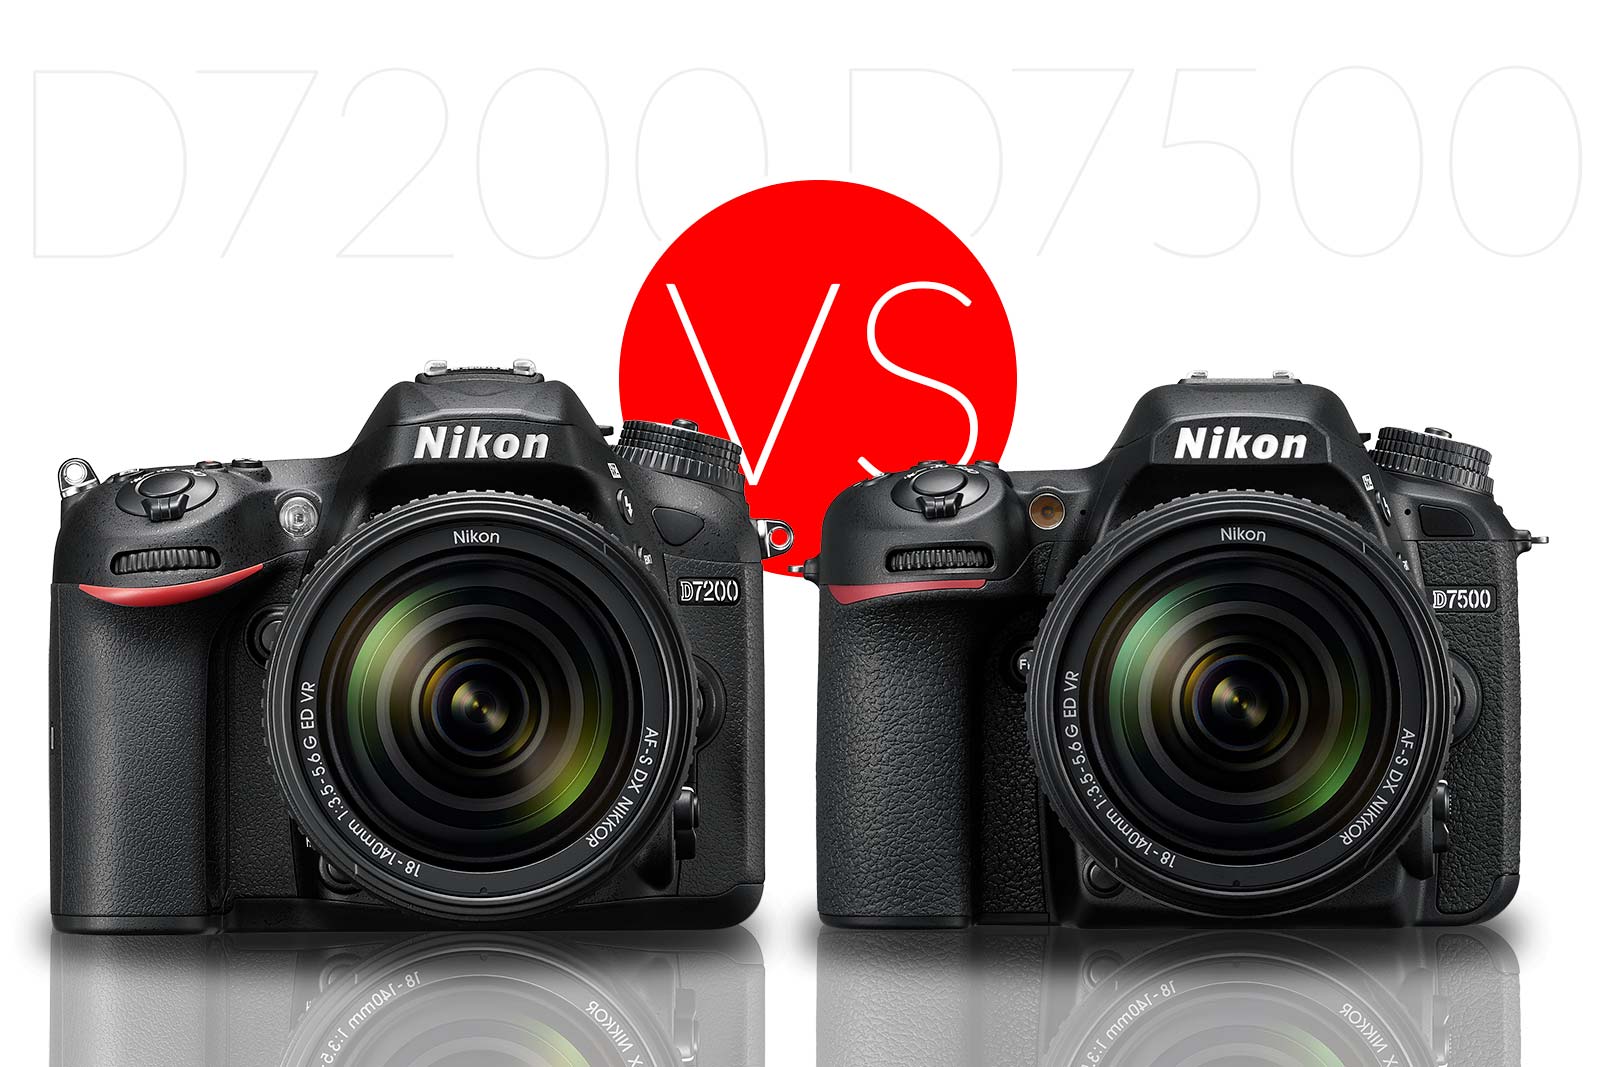 Nikon D7500 vs D7200: What's the Difference? - Light And Matter